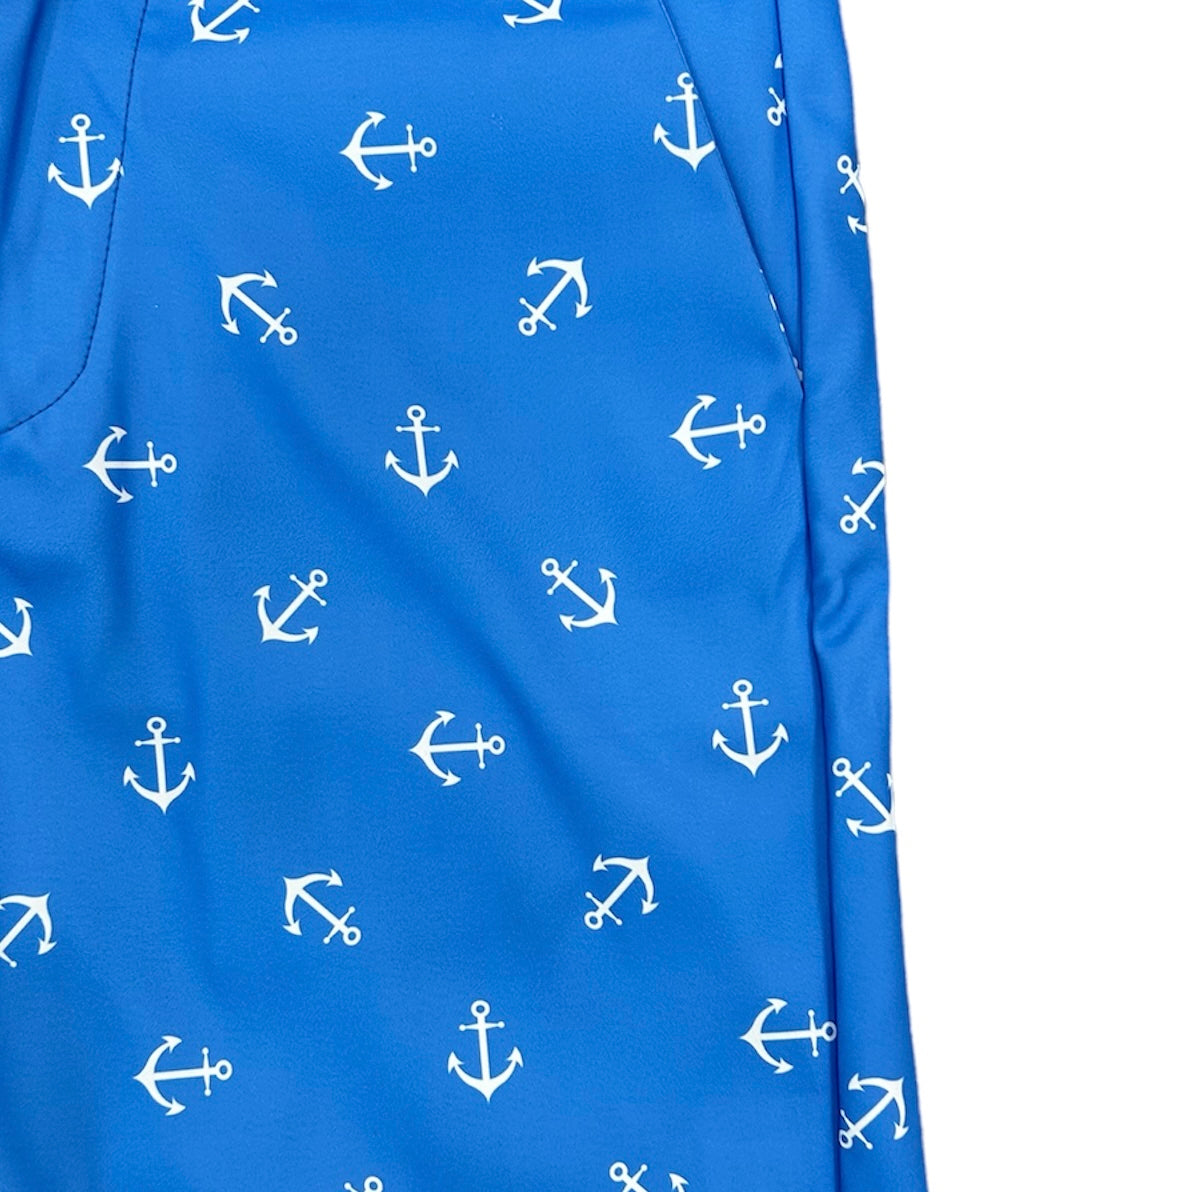 Golf Shorts - French Blue Anchors